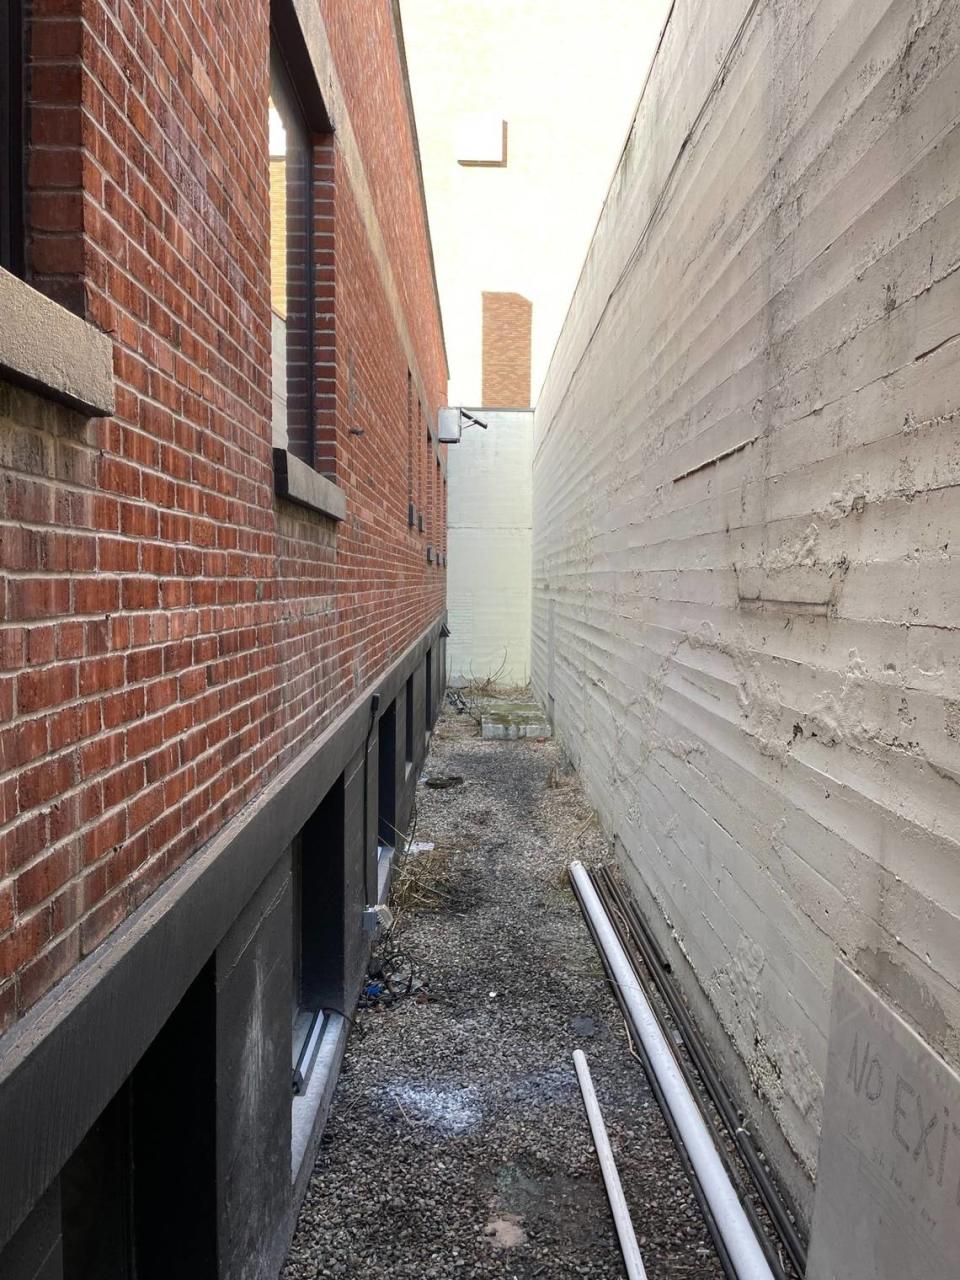 This unique, long, narrow outdoor area will feature a bartop “by summer, ideally,” says Alchemist Plant Pub owner Kris Price.